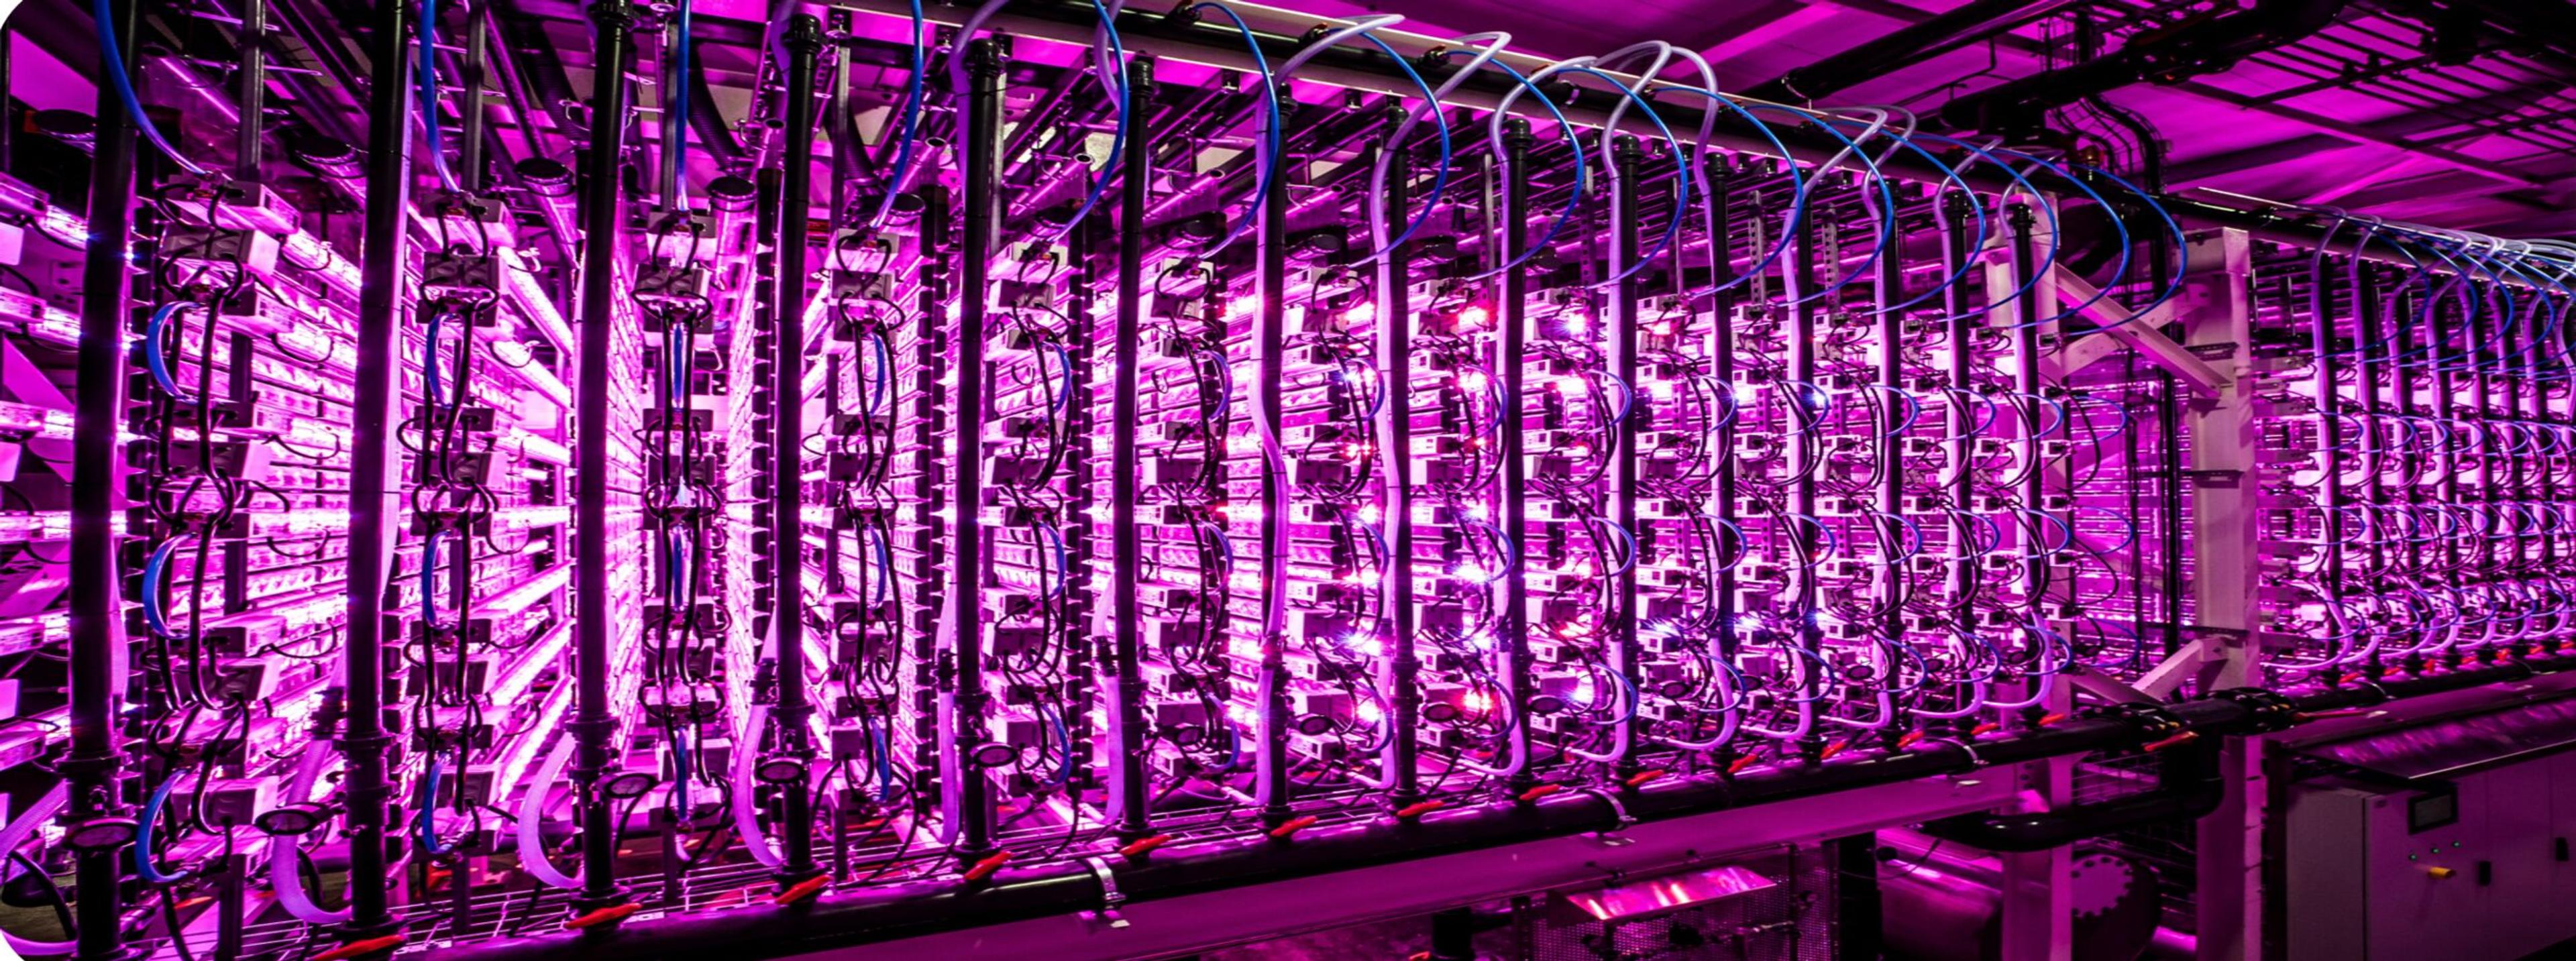 An expansive indoor vertical farming setup with rows of algae cultivation tanks illuminated by vibrant pink LED lights, creating an intense and futuristic atmosphere